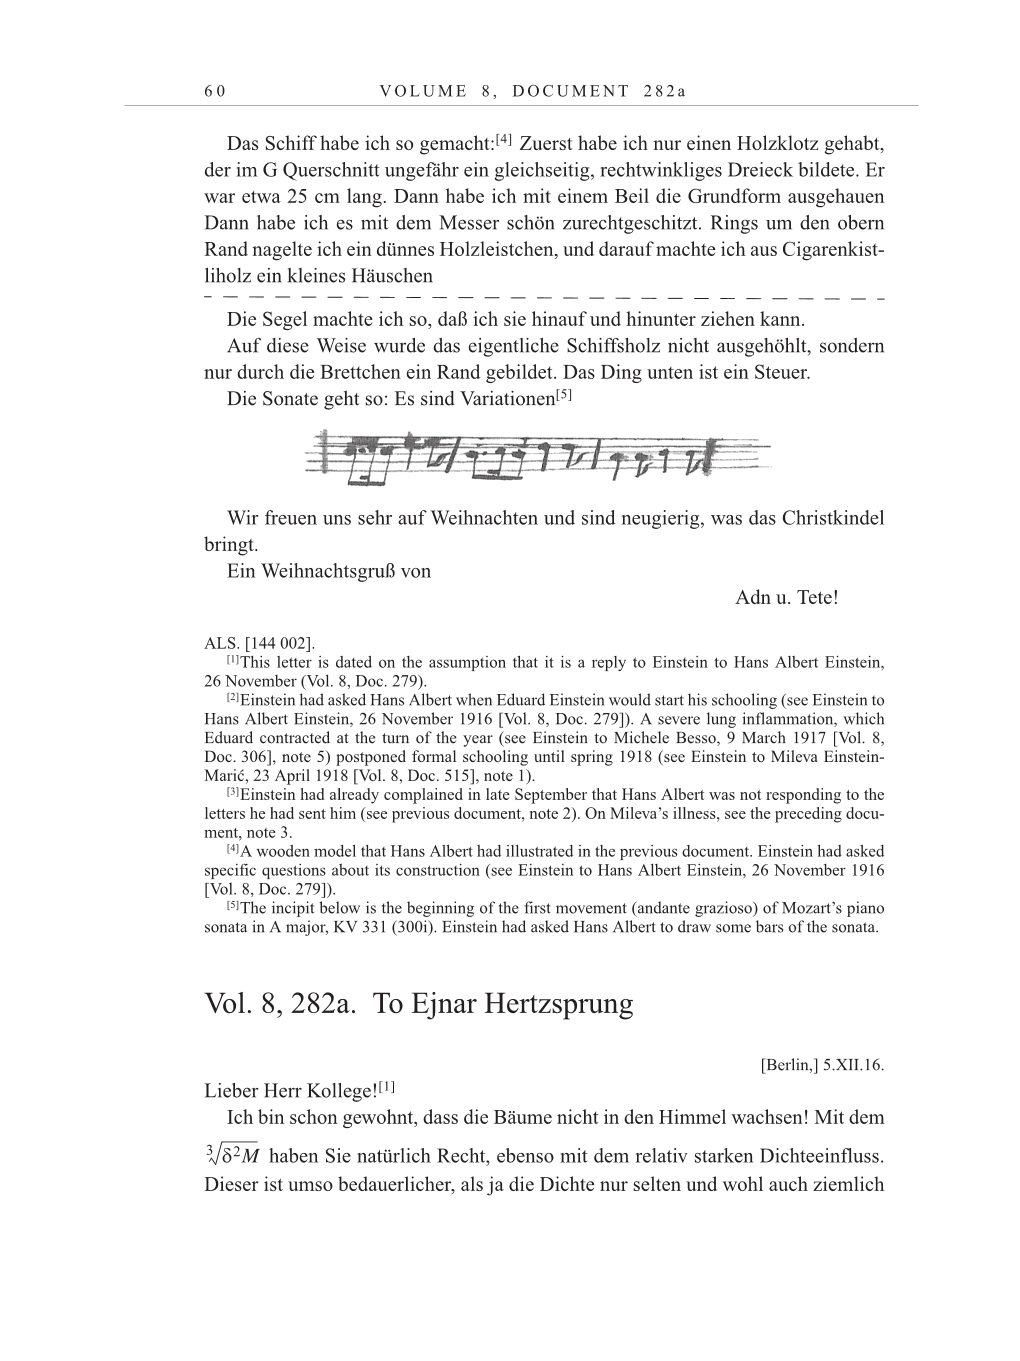 Volume 10: The Berlin Years: Correspondence May-December 1920 / Supplementary Correspondence 1909-1920 page 60